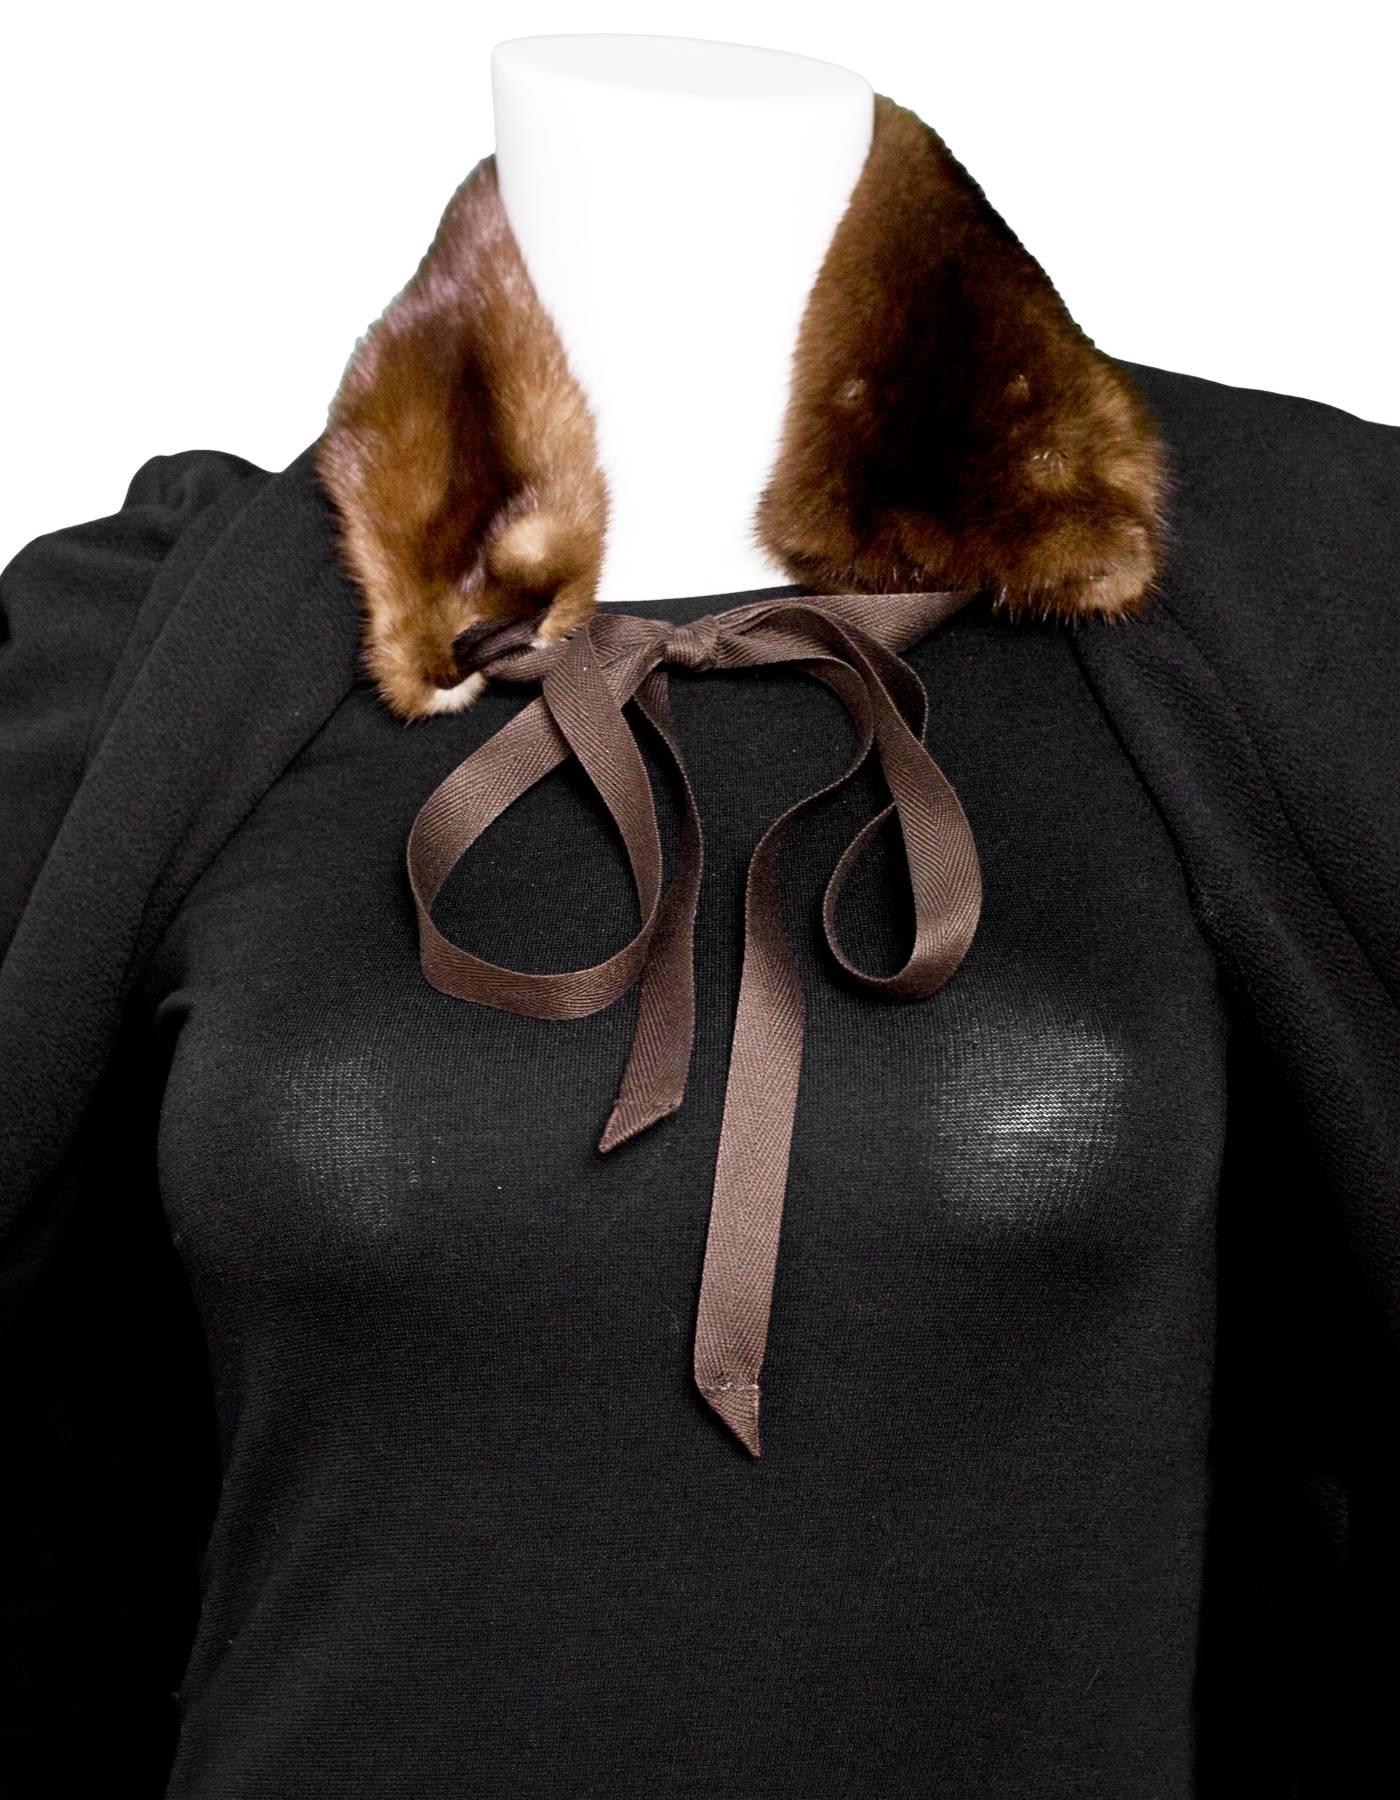 Prada Brown Mink Collar

Color: Brown
Composition: Believed to be mink
Closure/Opening: Tie closure
Overall Condition: Excellent pre-owned condition
Included: Prada box

Measurements:
Mink piece: 17"